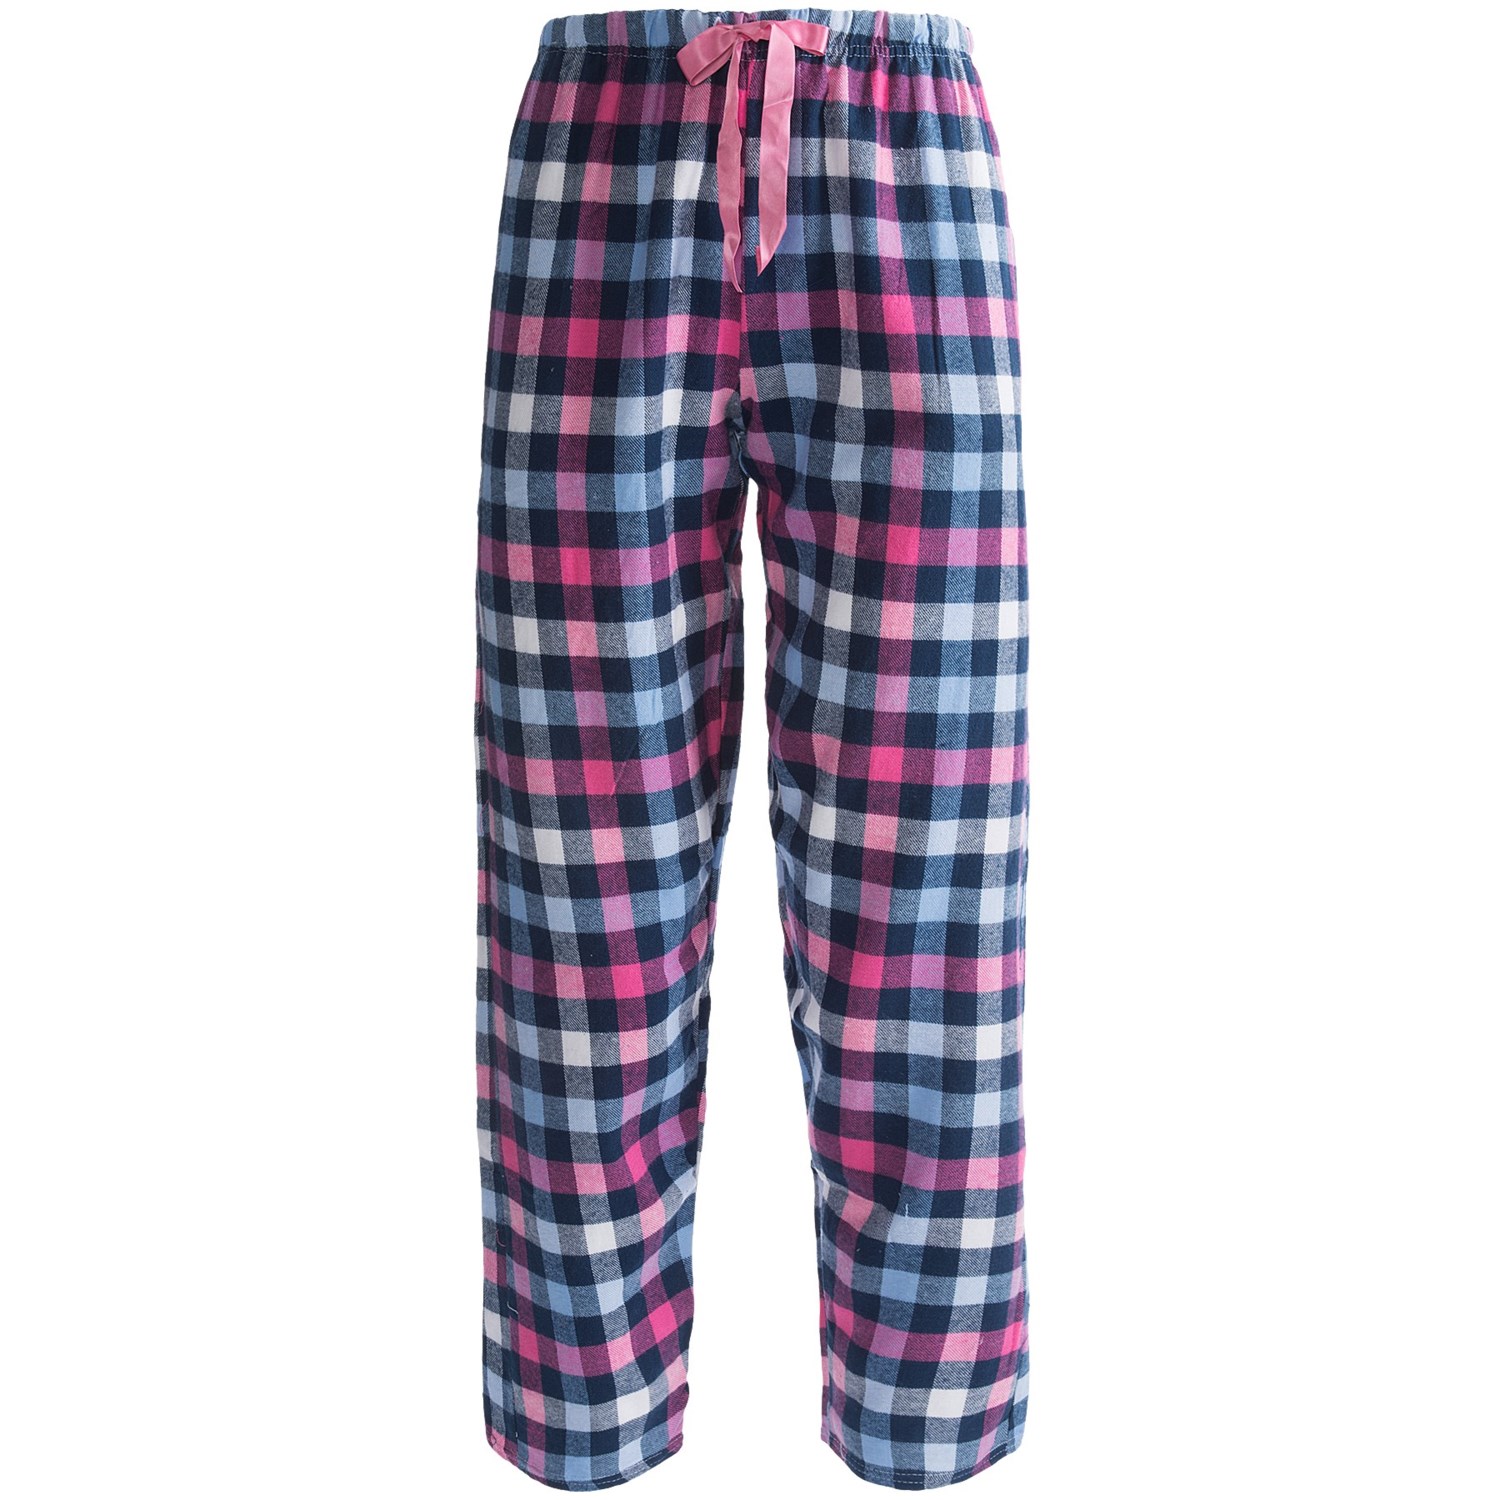 Northwest Blue Plaid Lounge Pants - Flannel (For Women) - Save 62%